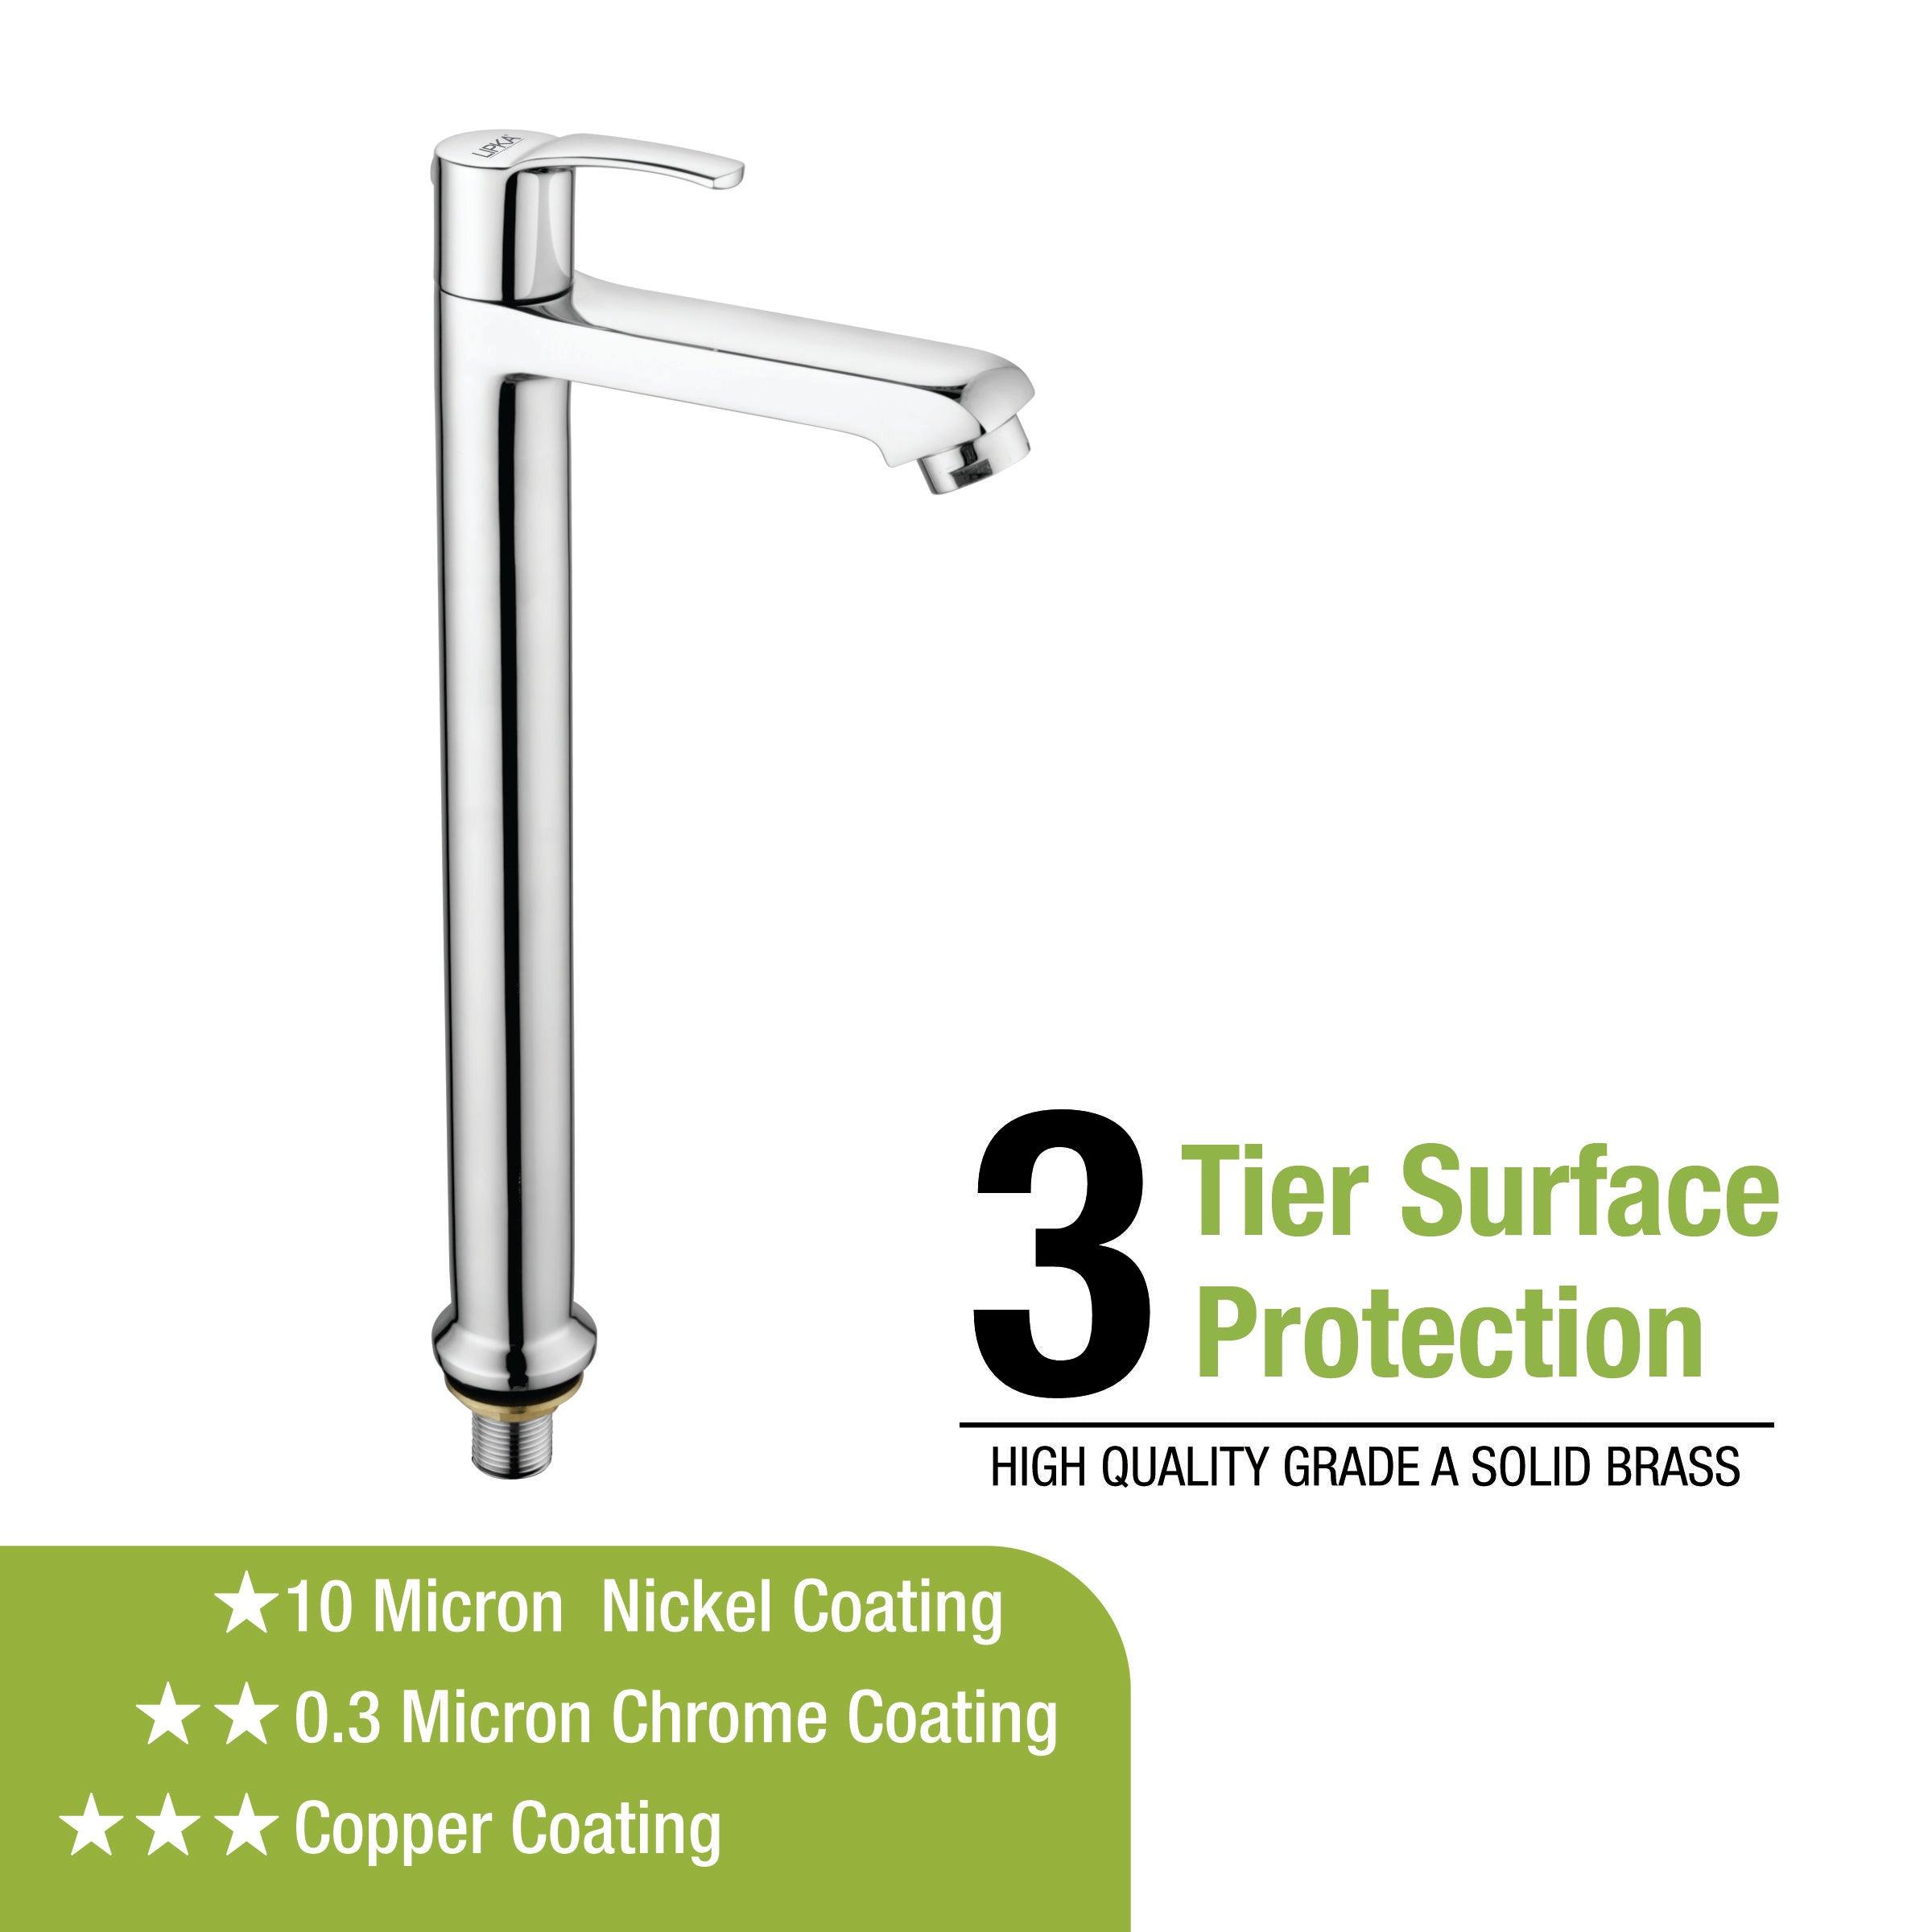 Coral Pillar Tap Tall Body Brass Faucet 3 tier surface protection